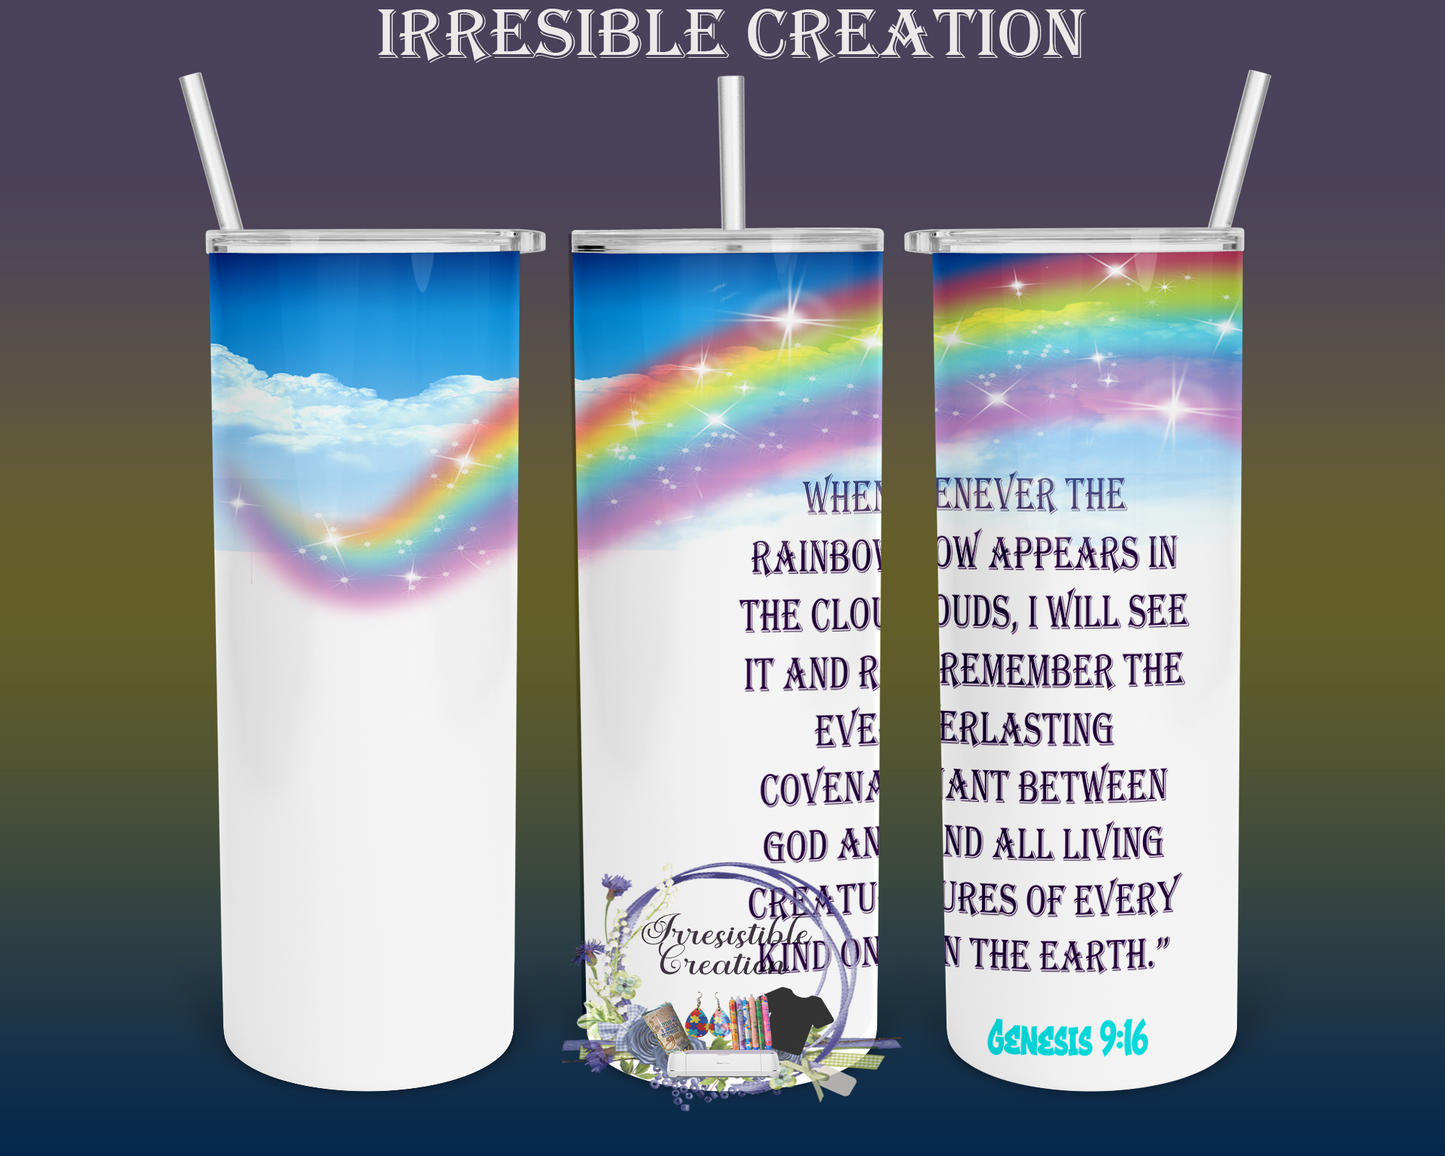 Custom-made by Irresistible Creation, this 20 oz tumbler features the inspiring quote from Genesis 9:16. Perfect for keeping your beverages at the ideal temperature, it combines faith and function in a beautifully designed drinkware piece